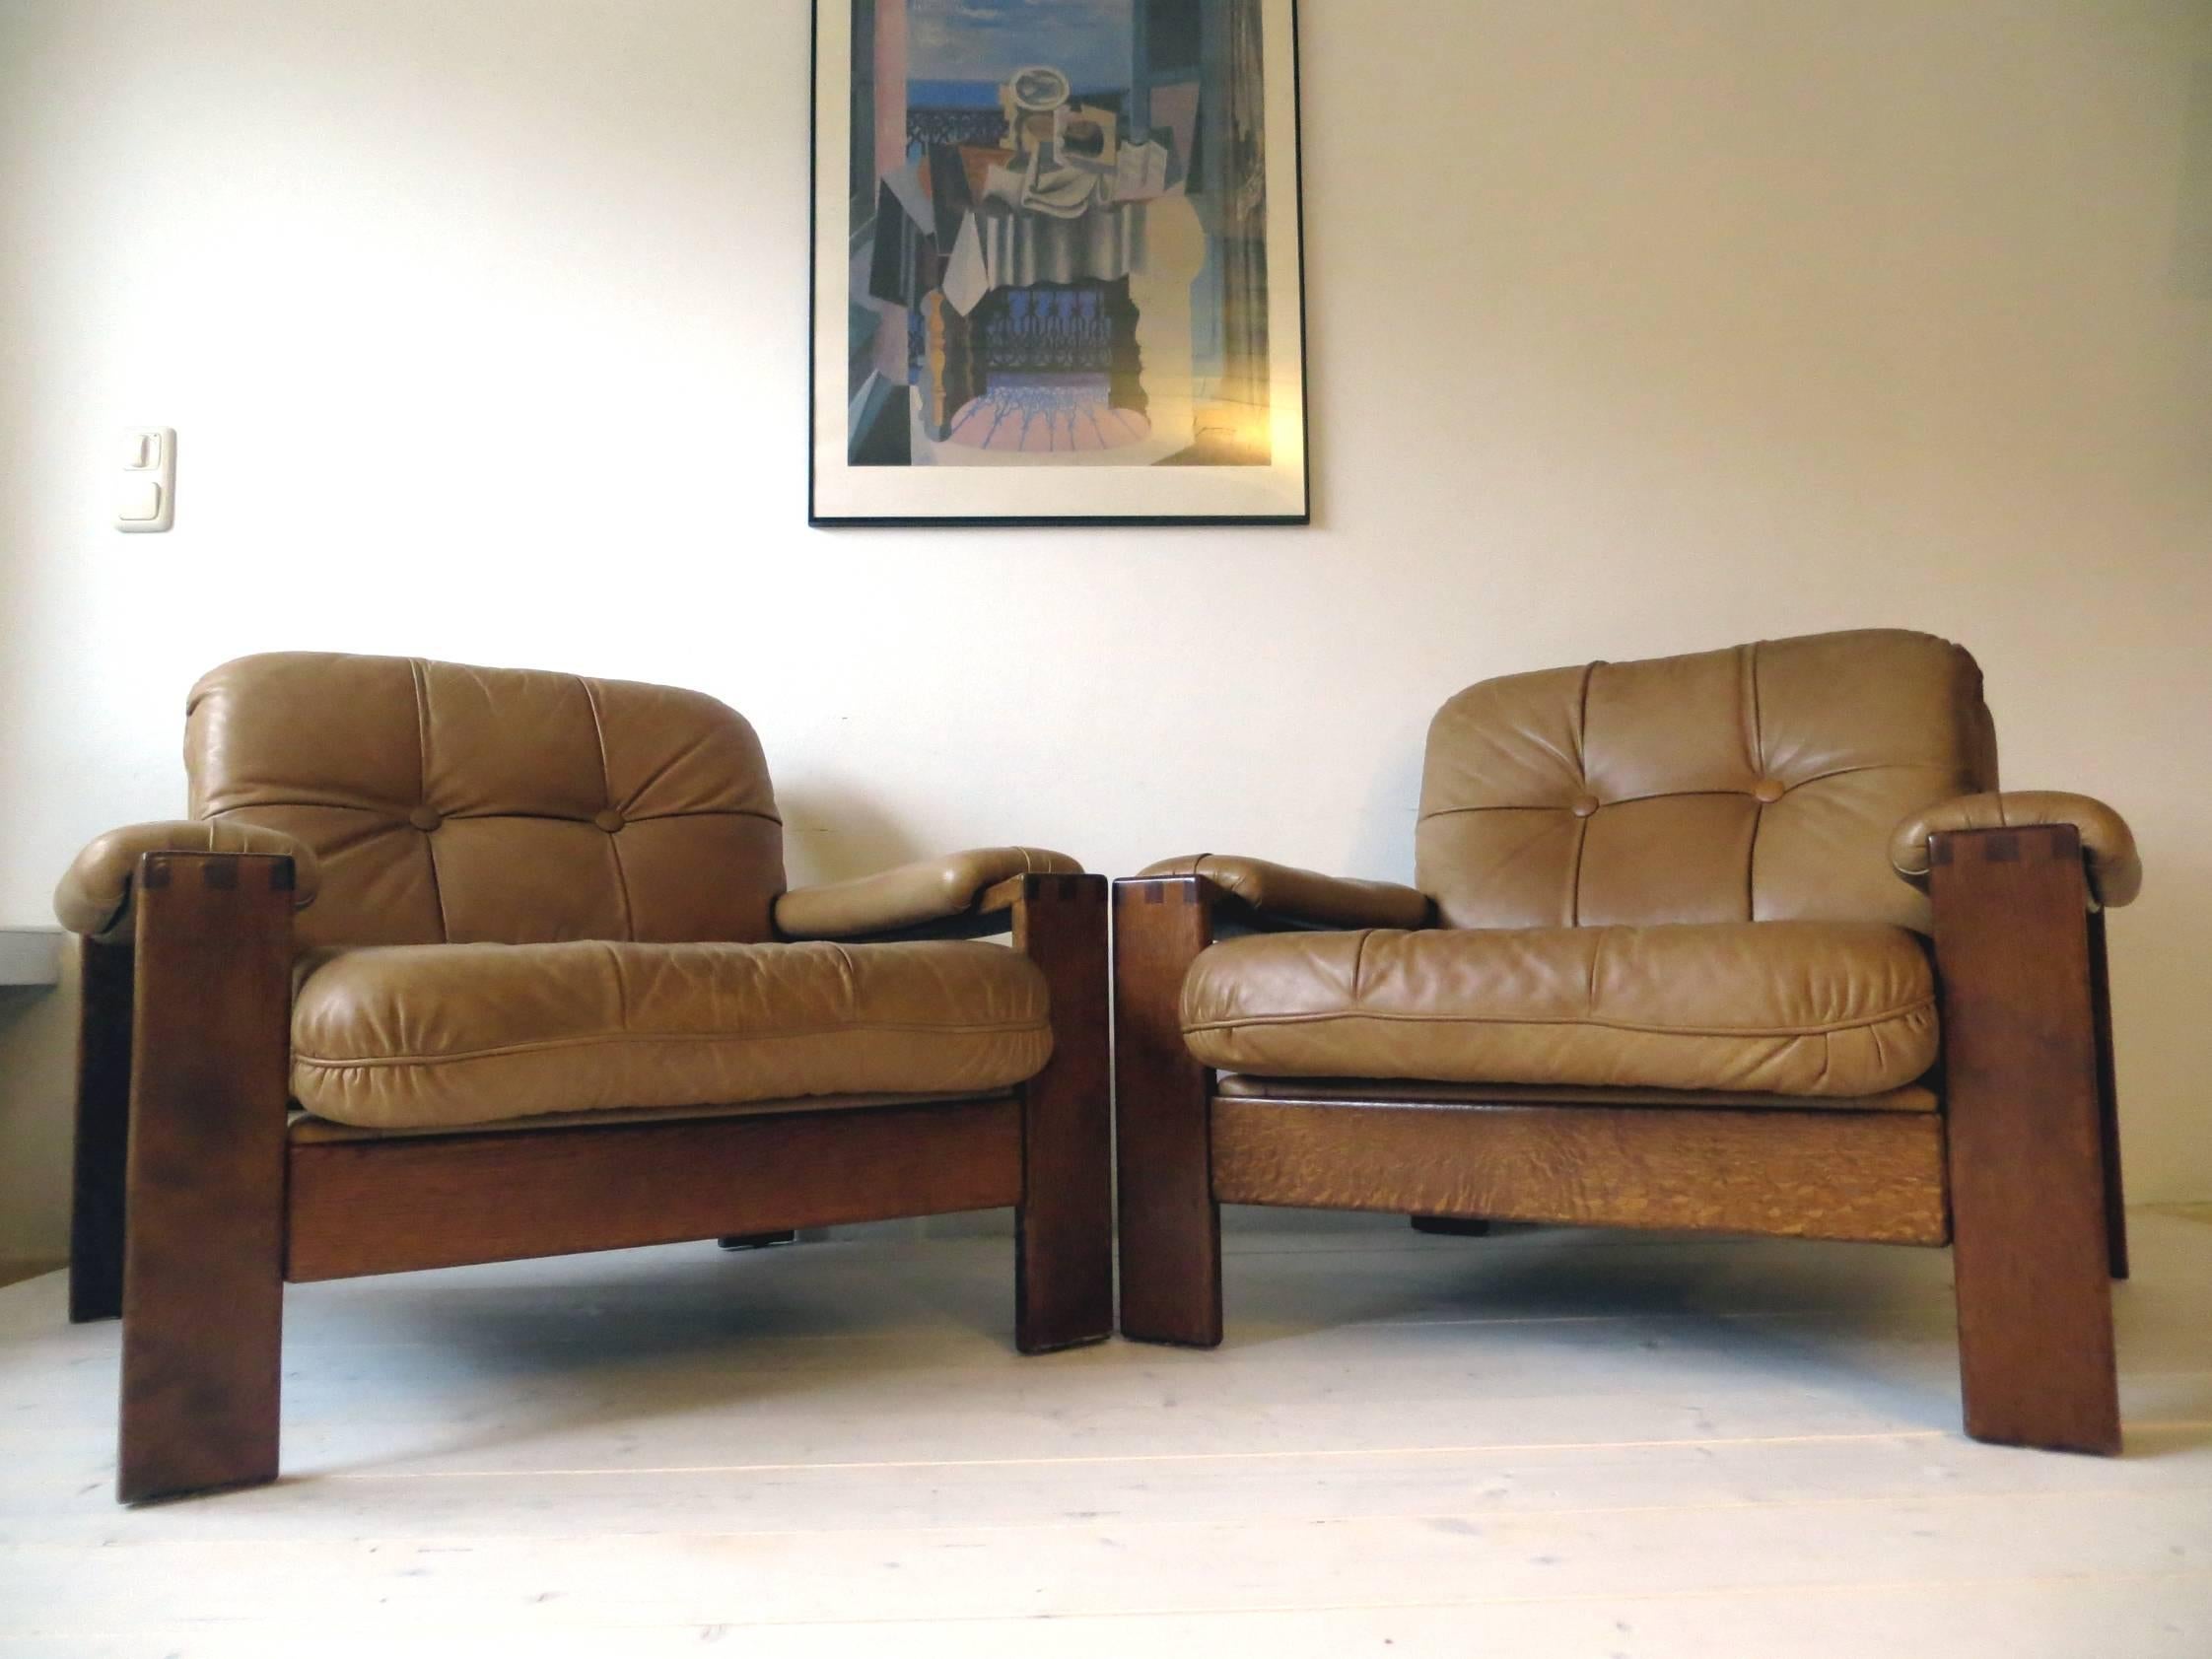 Two very comfortable Mid-Century Modern cottage / lodge leather armchairs, from the late 1960s-early 1970s, are available here.
The design is reminiscent of Esko Pajamies' 